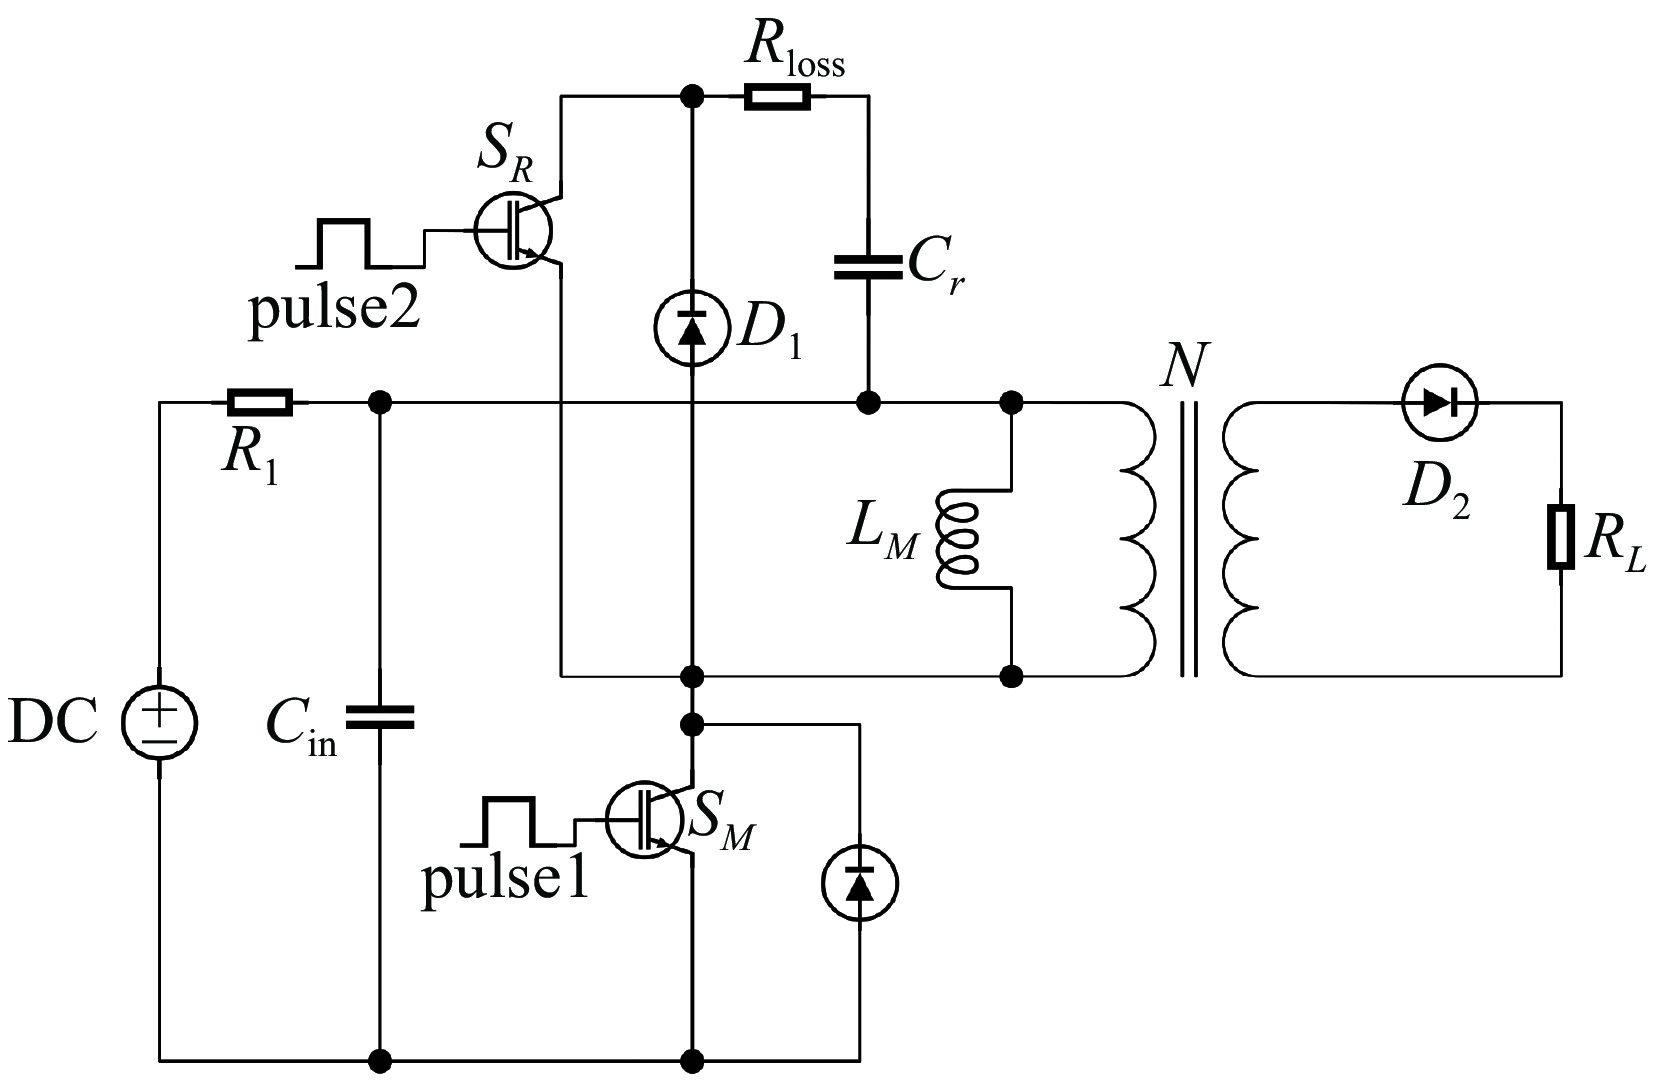 Diagram of reset circuit based on energy recovery